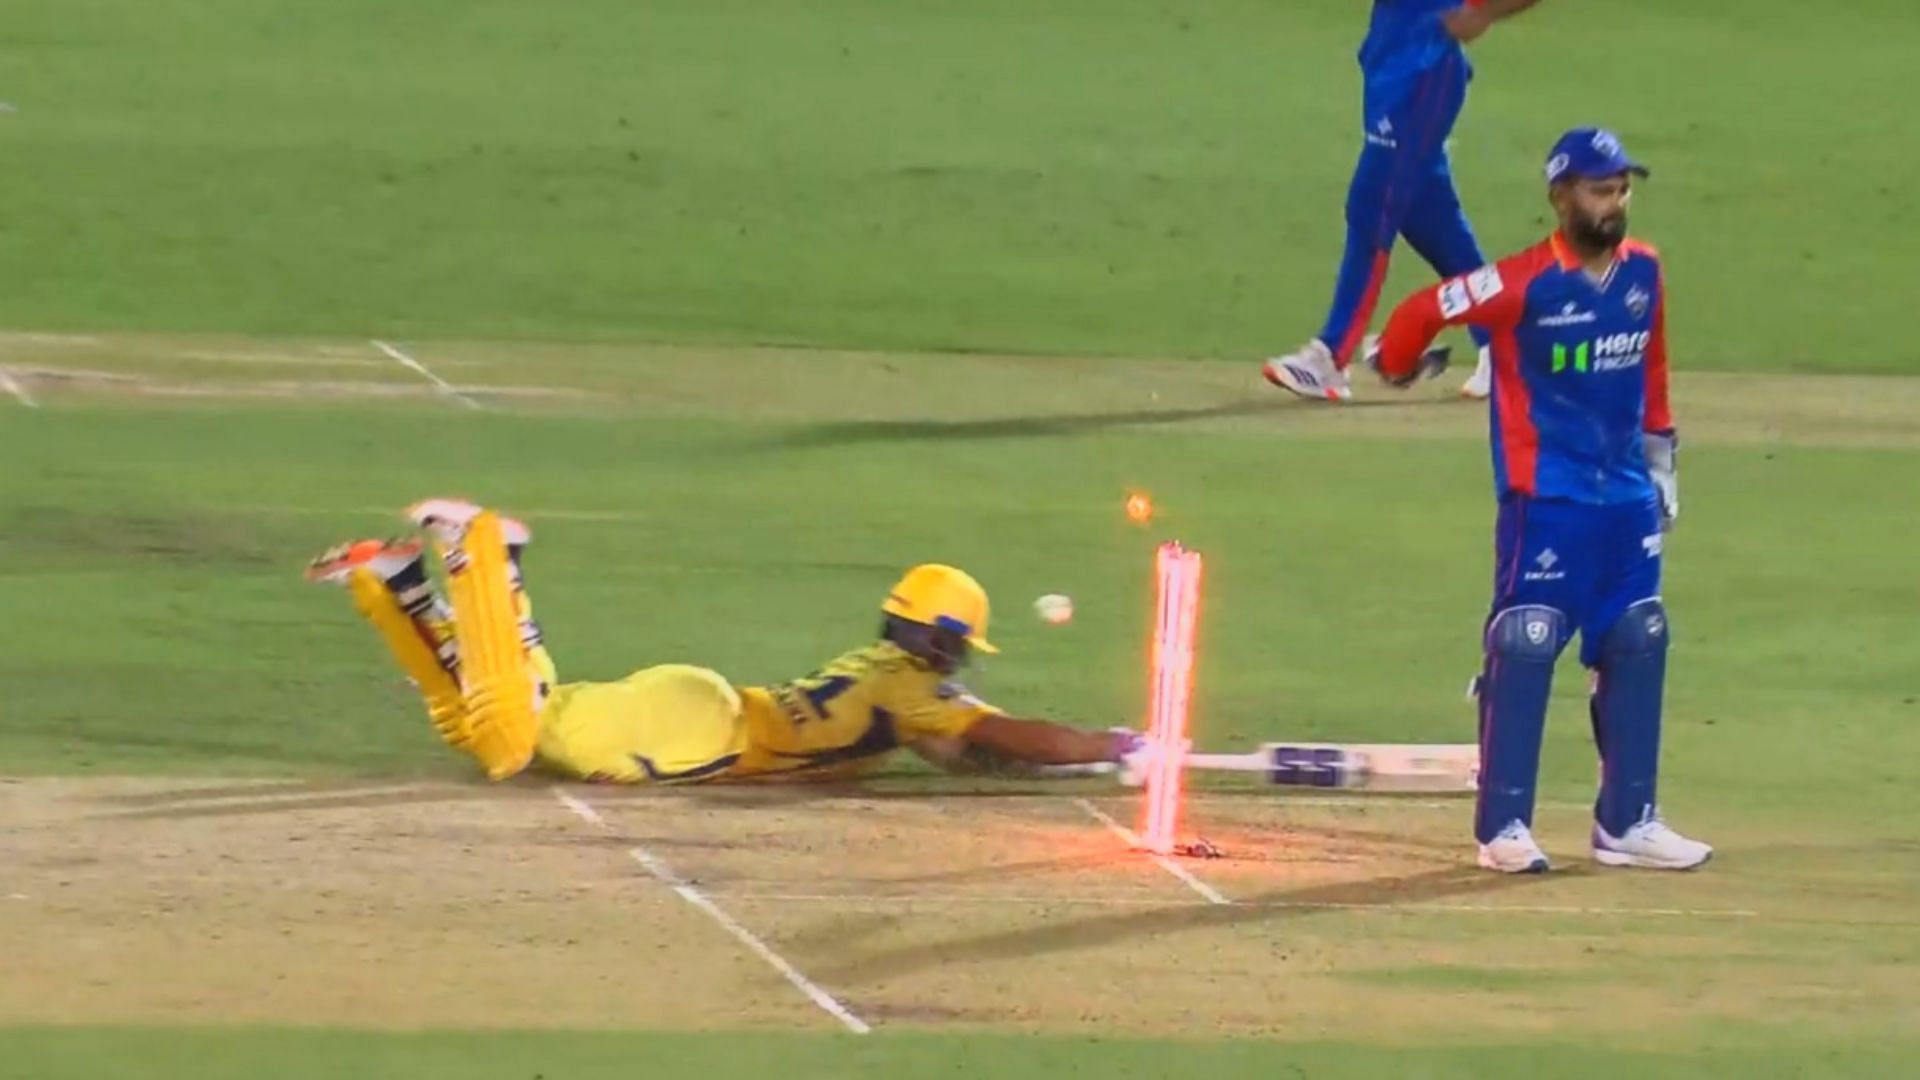 Rishabh Pant got the direct hit with the no-look run out attempt